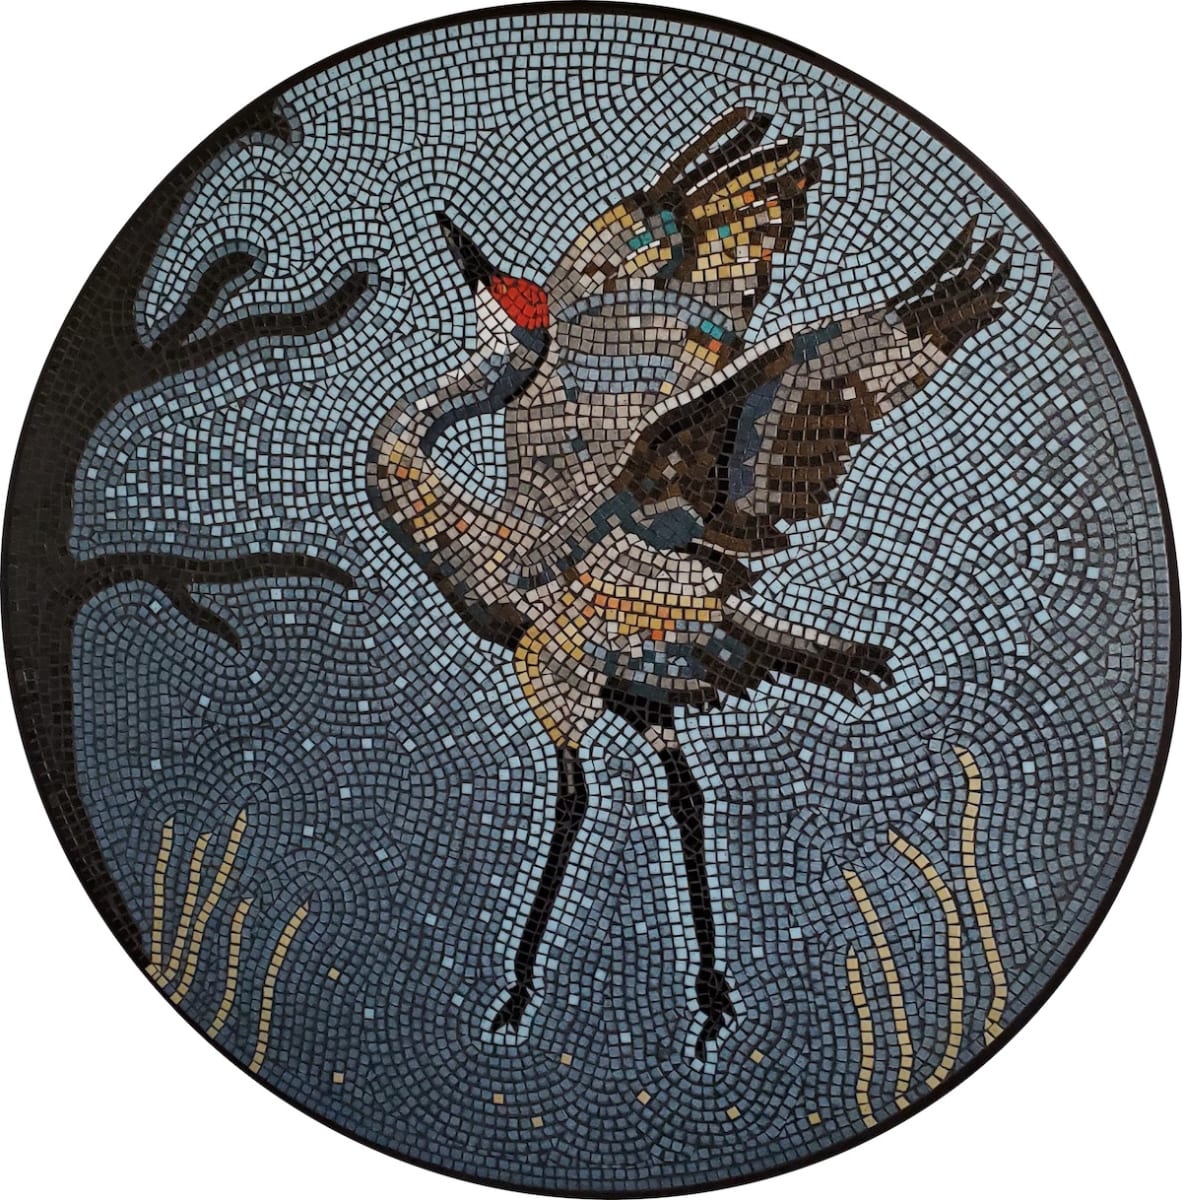 Sandhill Dream by Sue Rose  Image: This mosaic can be backlit or built into a wall as a stained glass window, or simply hung on an interior or exterior wall.